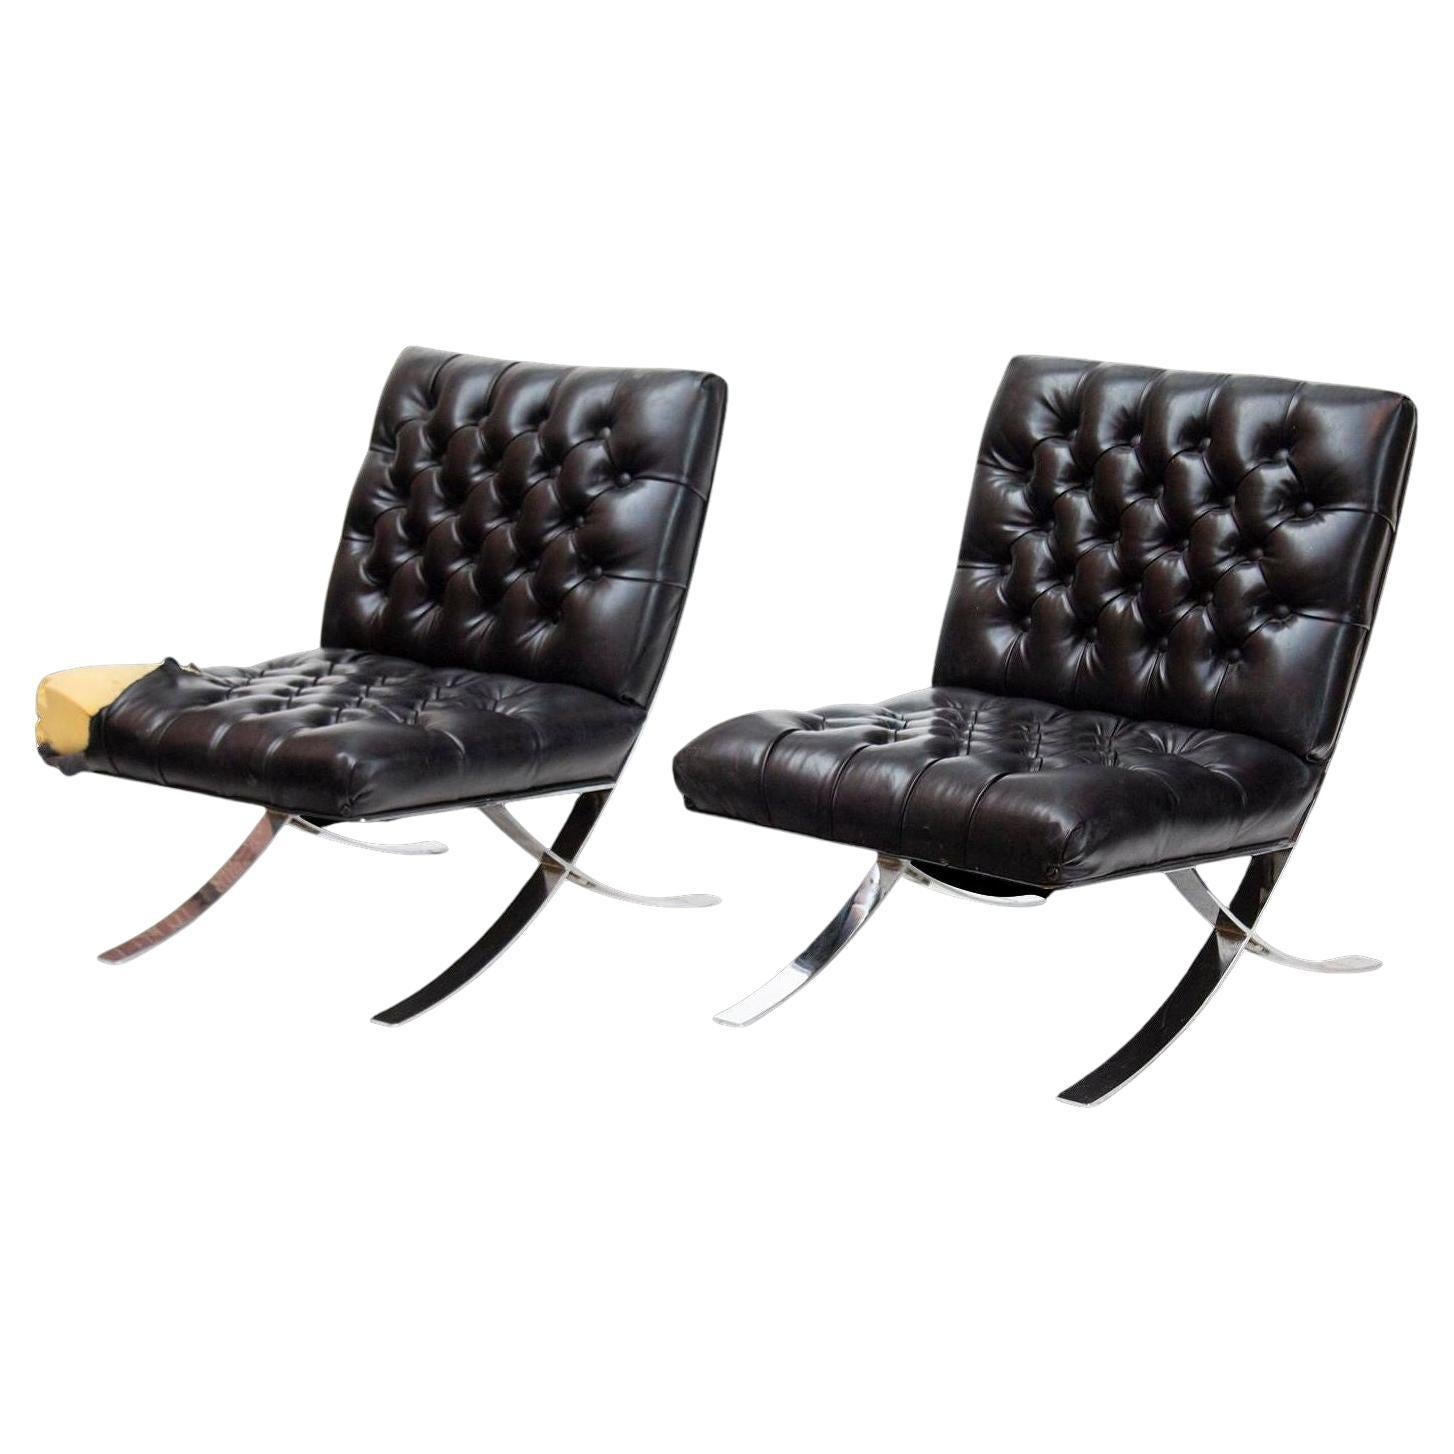 Tufted Barcelona-Style Chairs with Chrome Frames